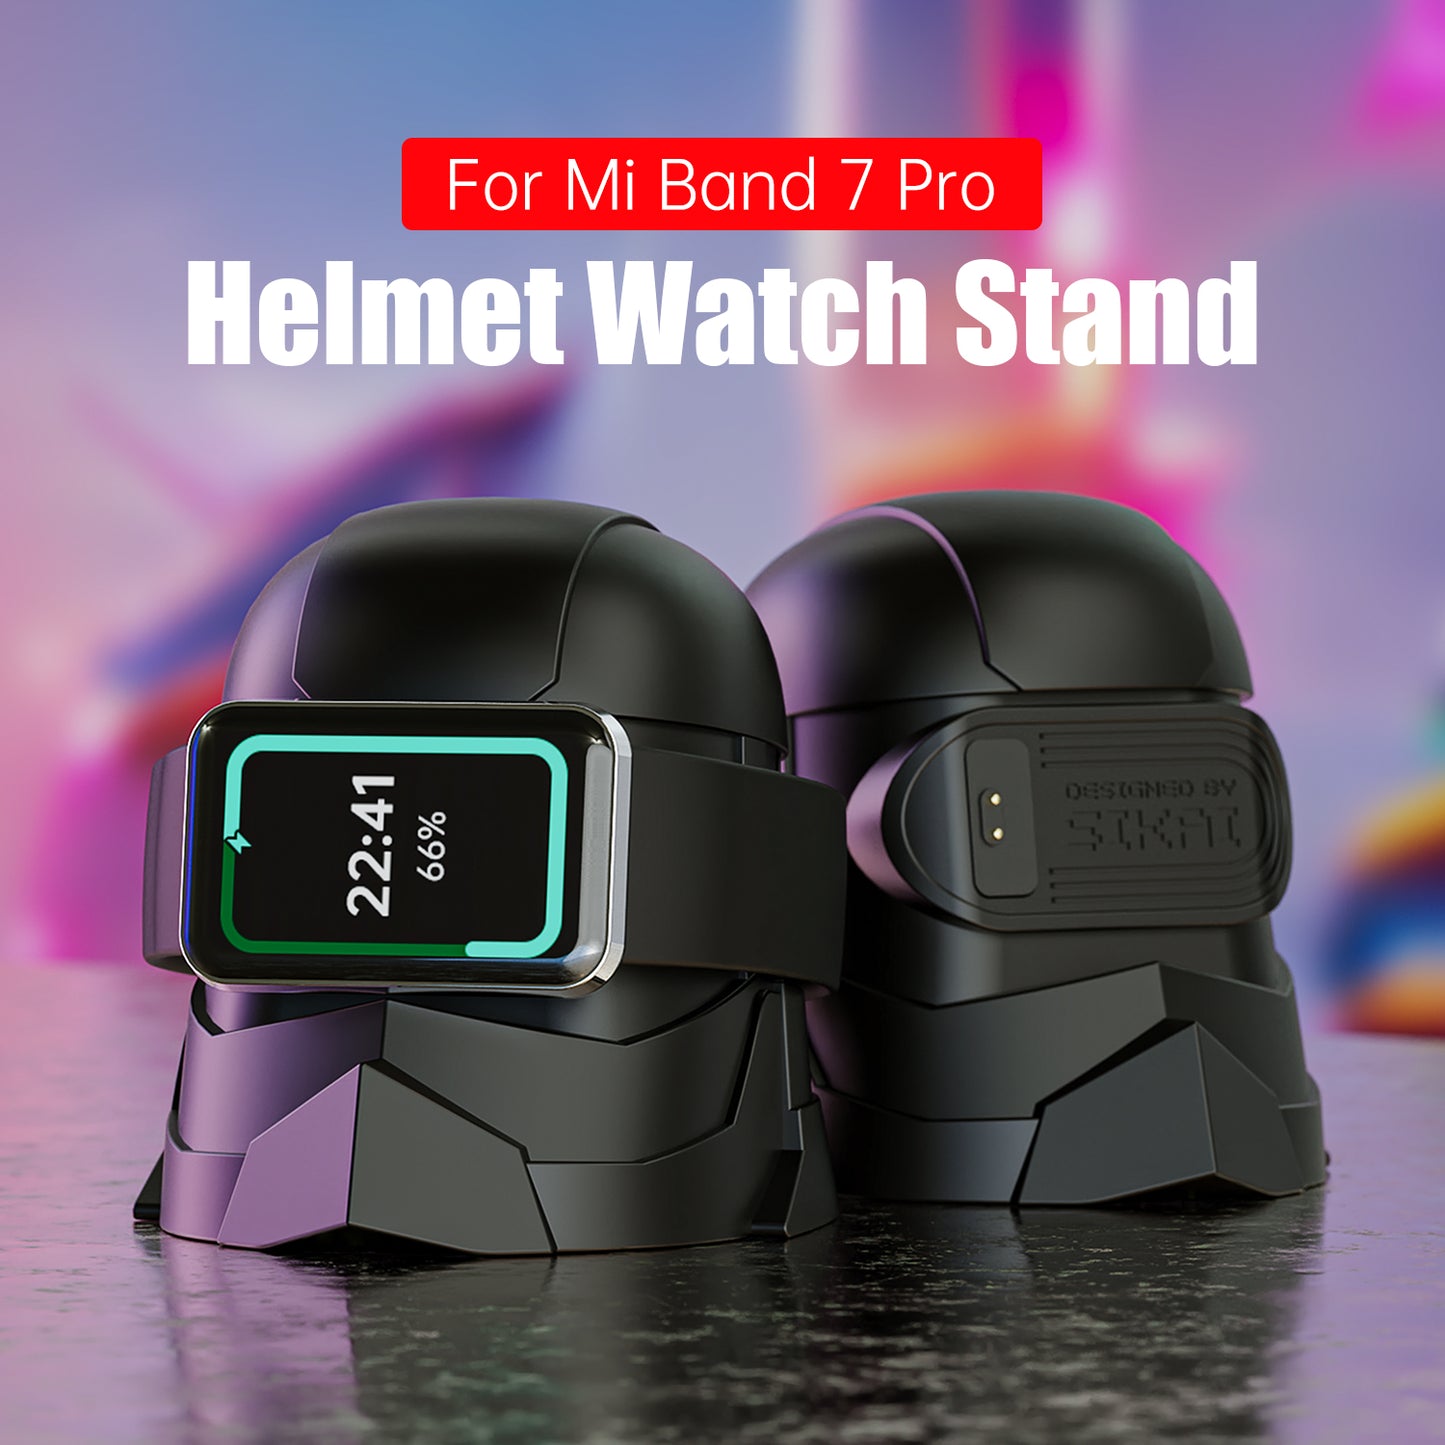 Stormer Silicone Stand for Xiaomi Mi Band 8Pro, 7 Pro / Redmi Smart Band Pro Charger Station Dock, Compatible with Xiaomi 8 Pro Smart Band